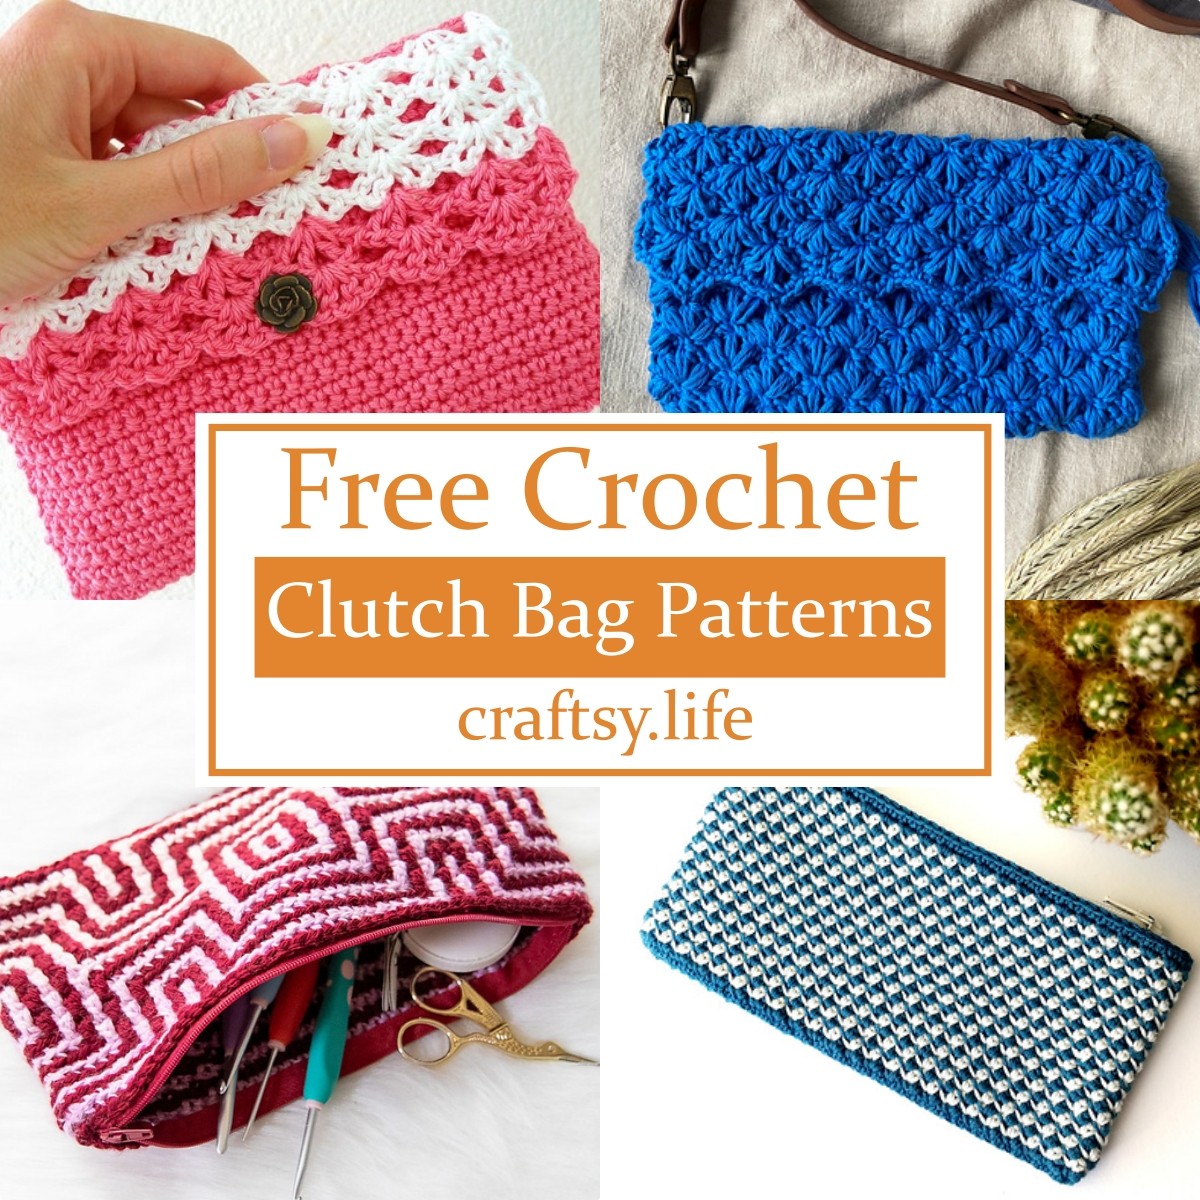 26 Free Crochet Clutch Bag Patterns For Ladies - Craftsy